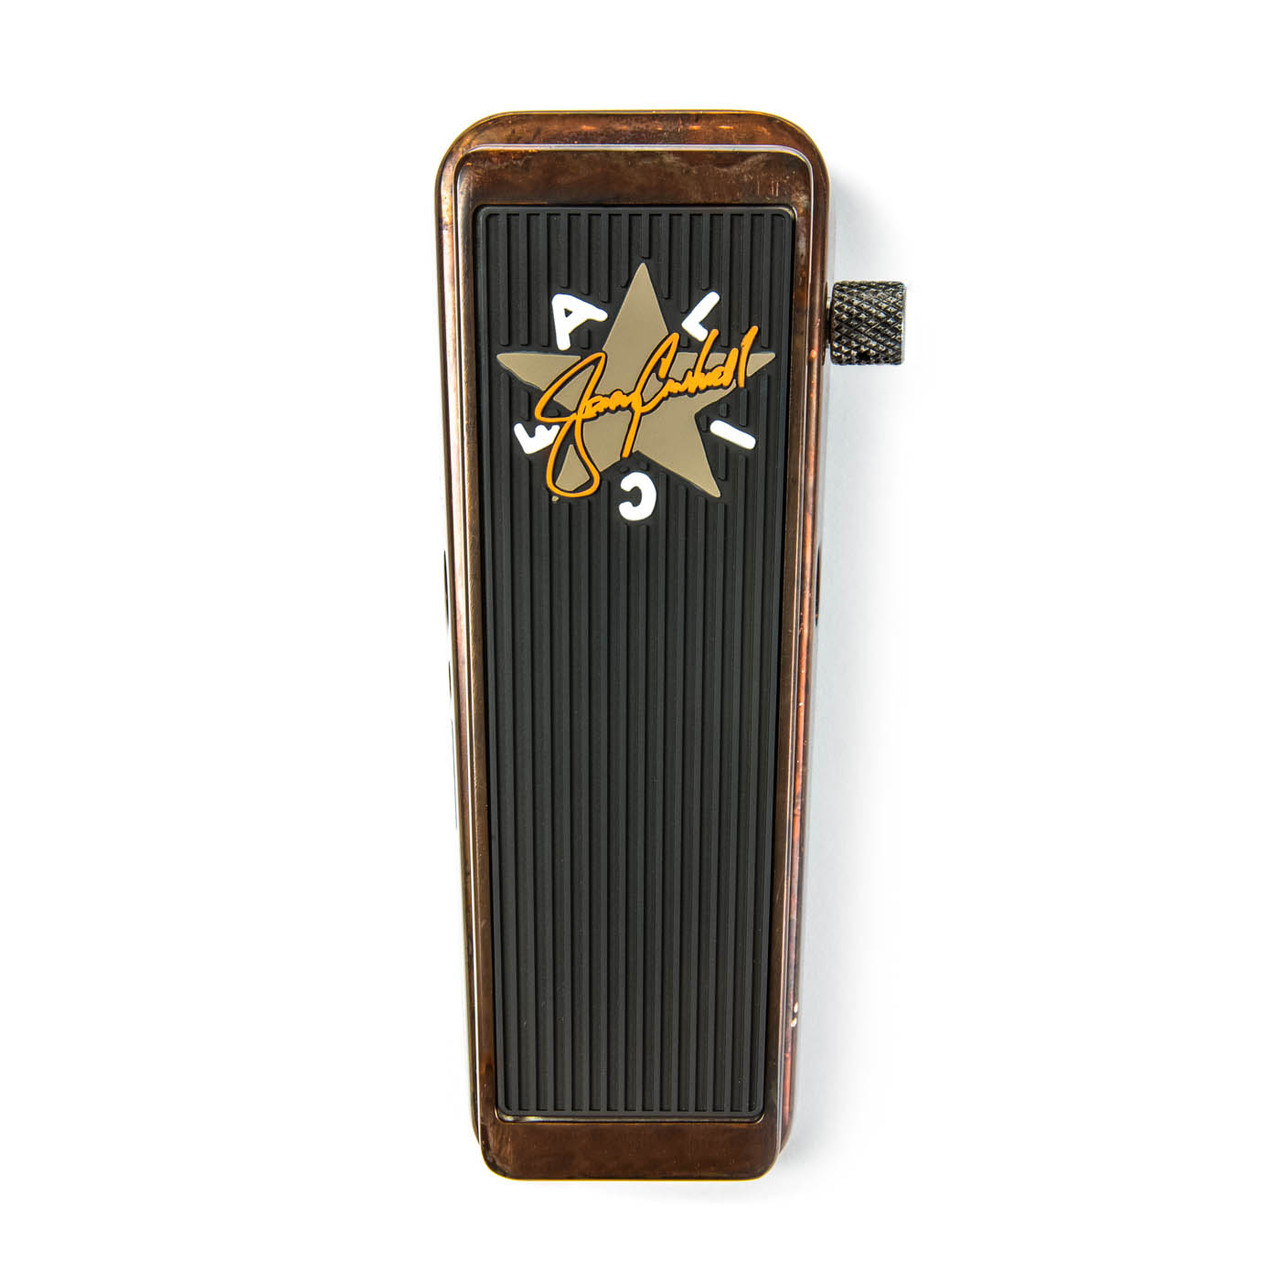 Dunlop JC95B Jerry Cantrell Signature Ranier Fog Cry Baby Wah